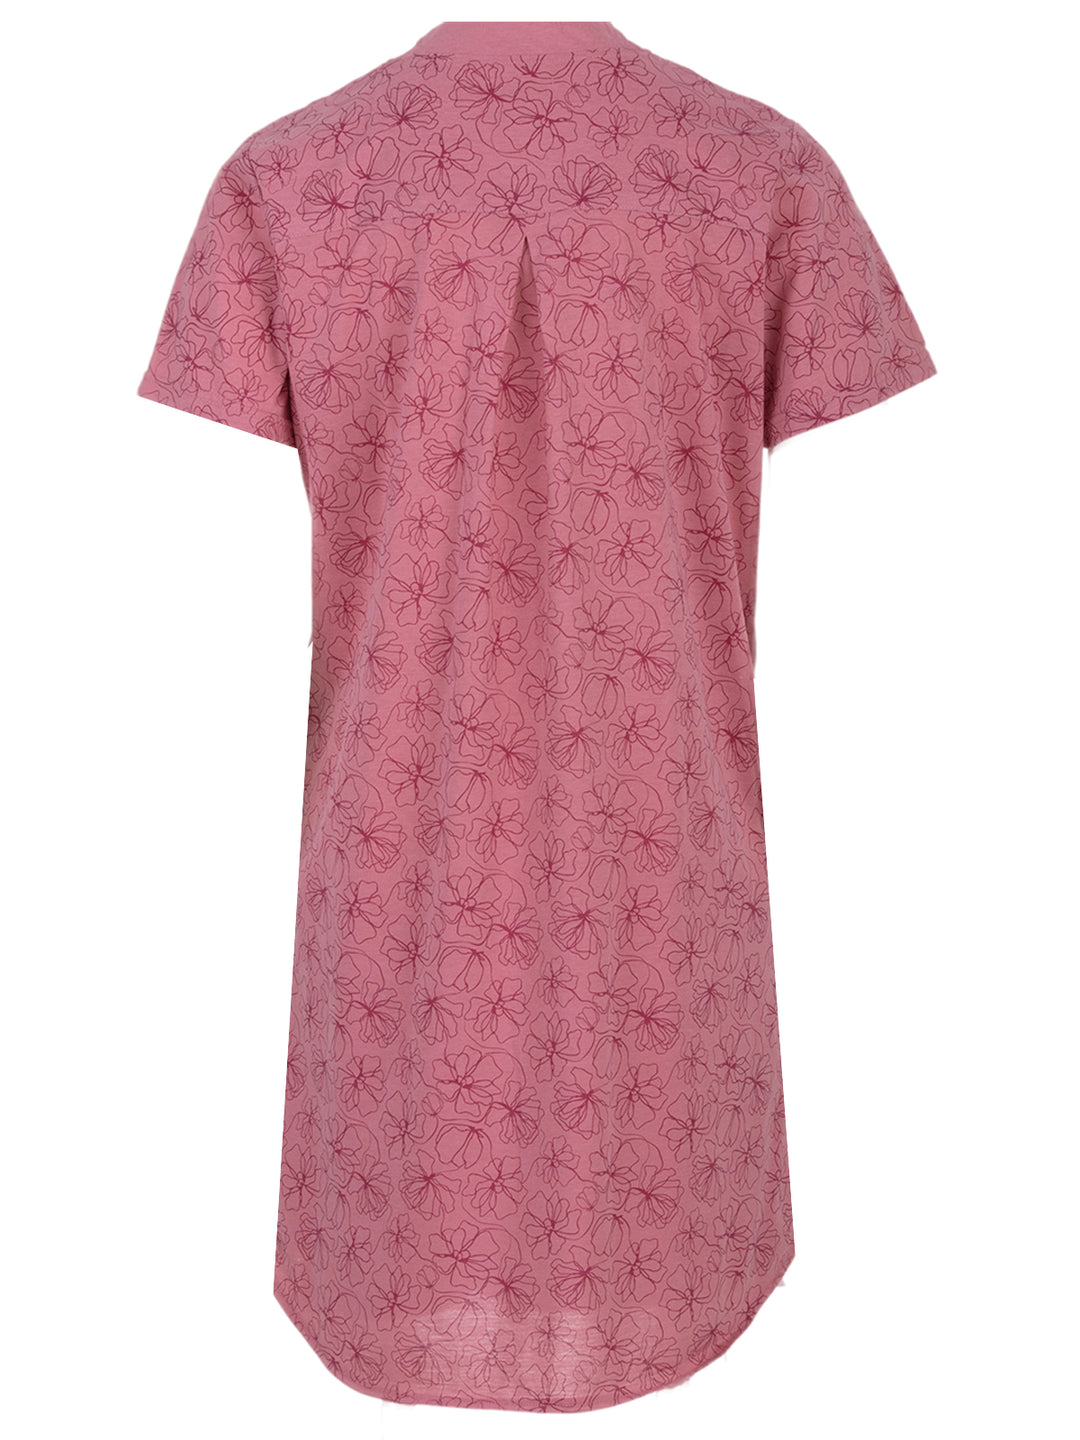 Nightgown Short Sleeve - Blossoms Collar Floral